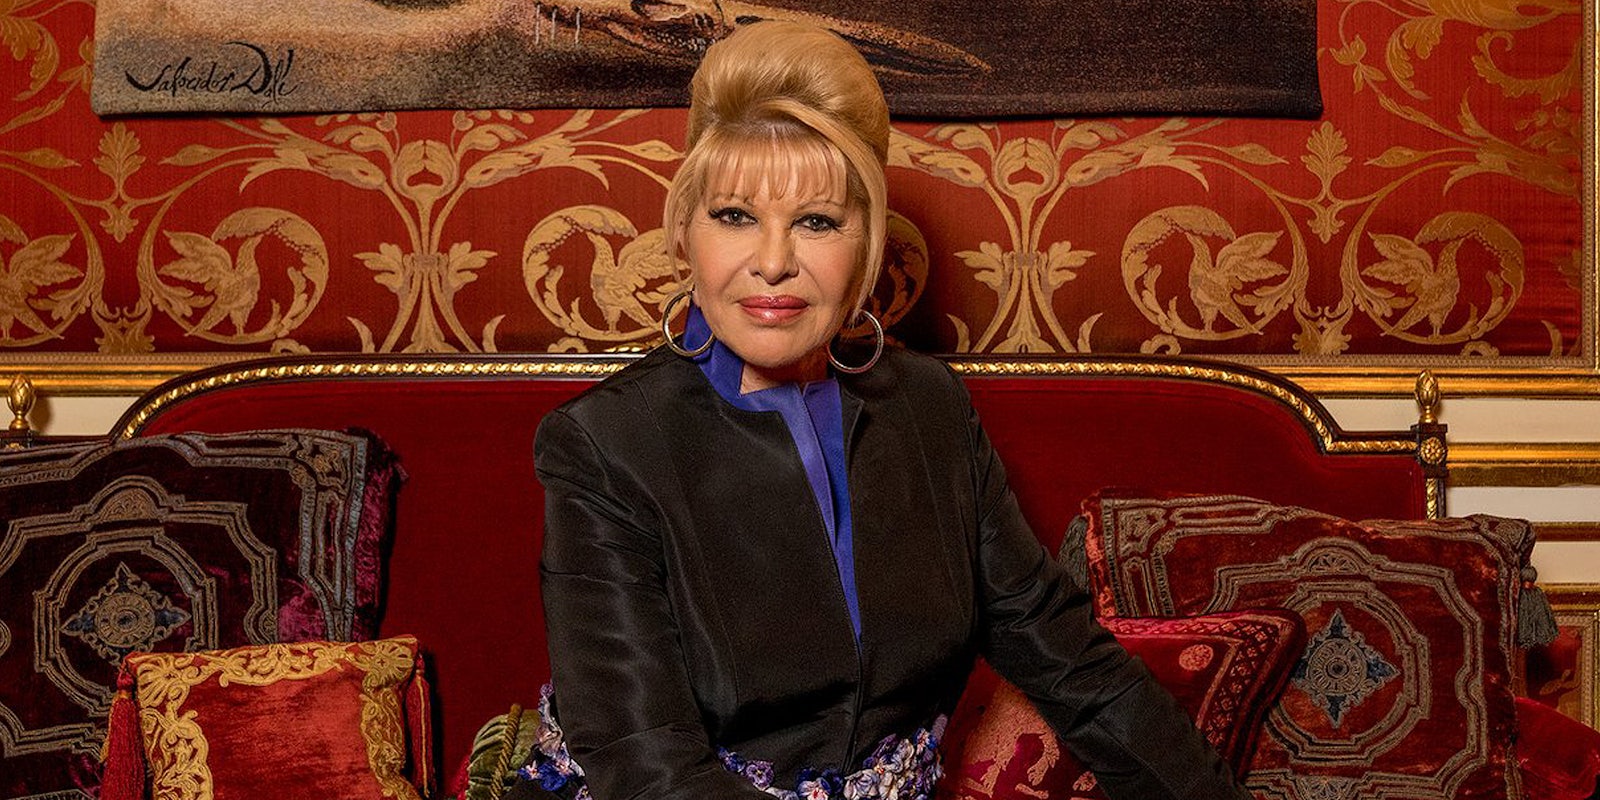 Ivana Trump sitting on red couch with red wall and painting behind her